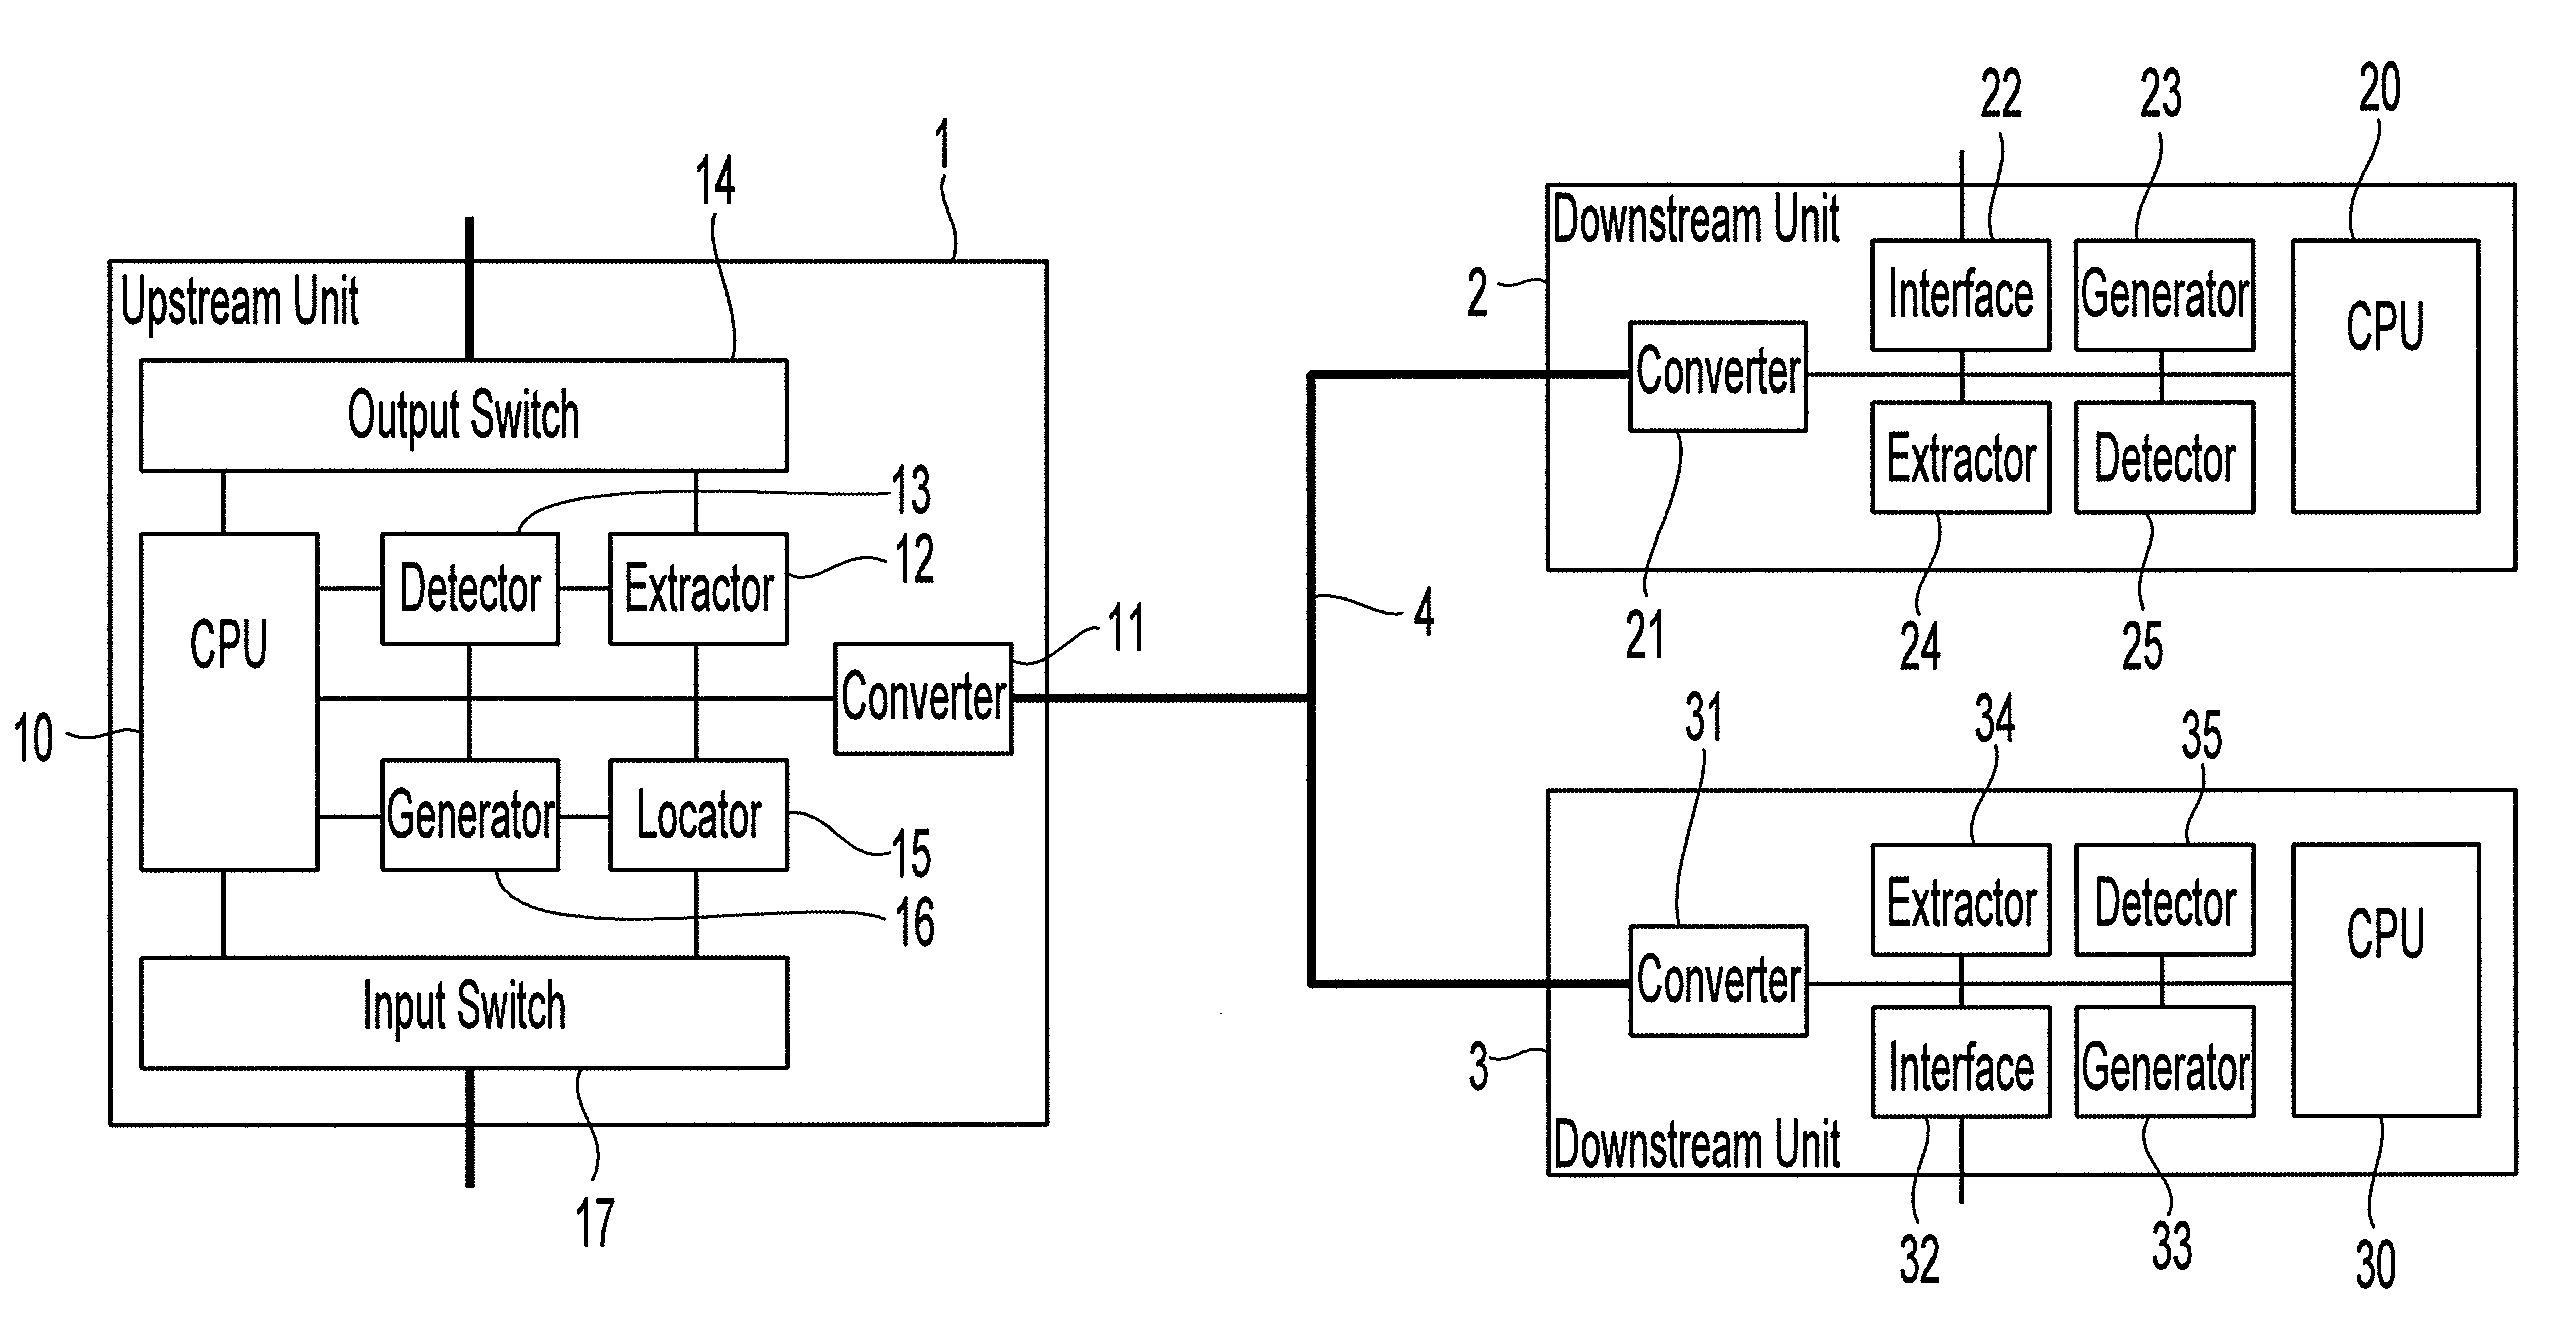 Point-to-multipoint telecommunication system with downstream frame structure